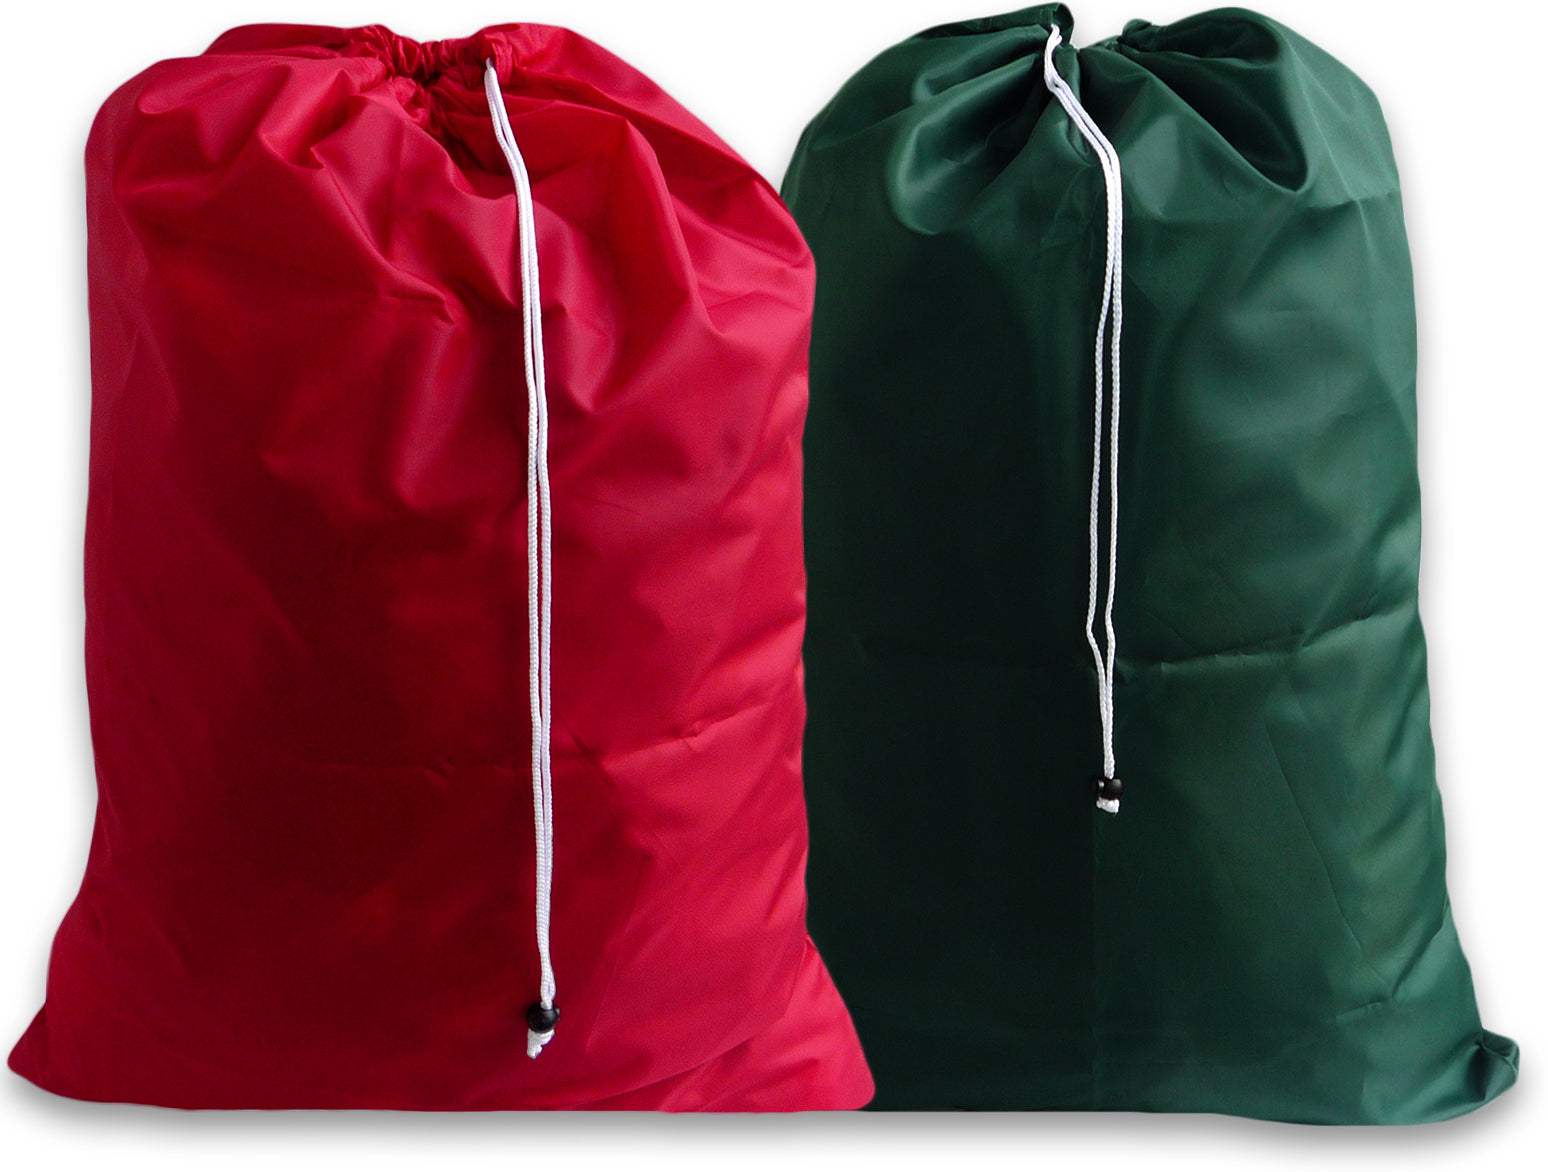 Two Pack, Extra Large Laundry Bags, Red, Green